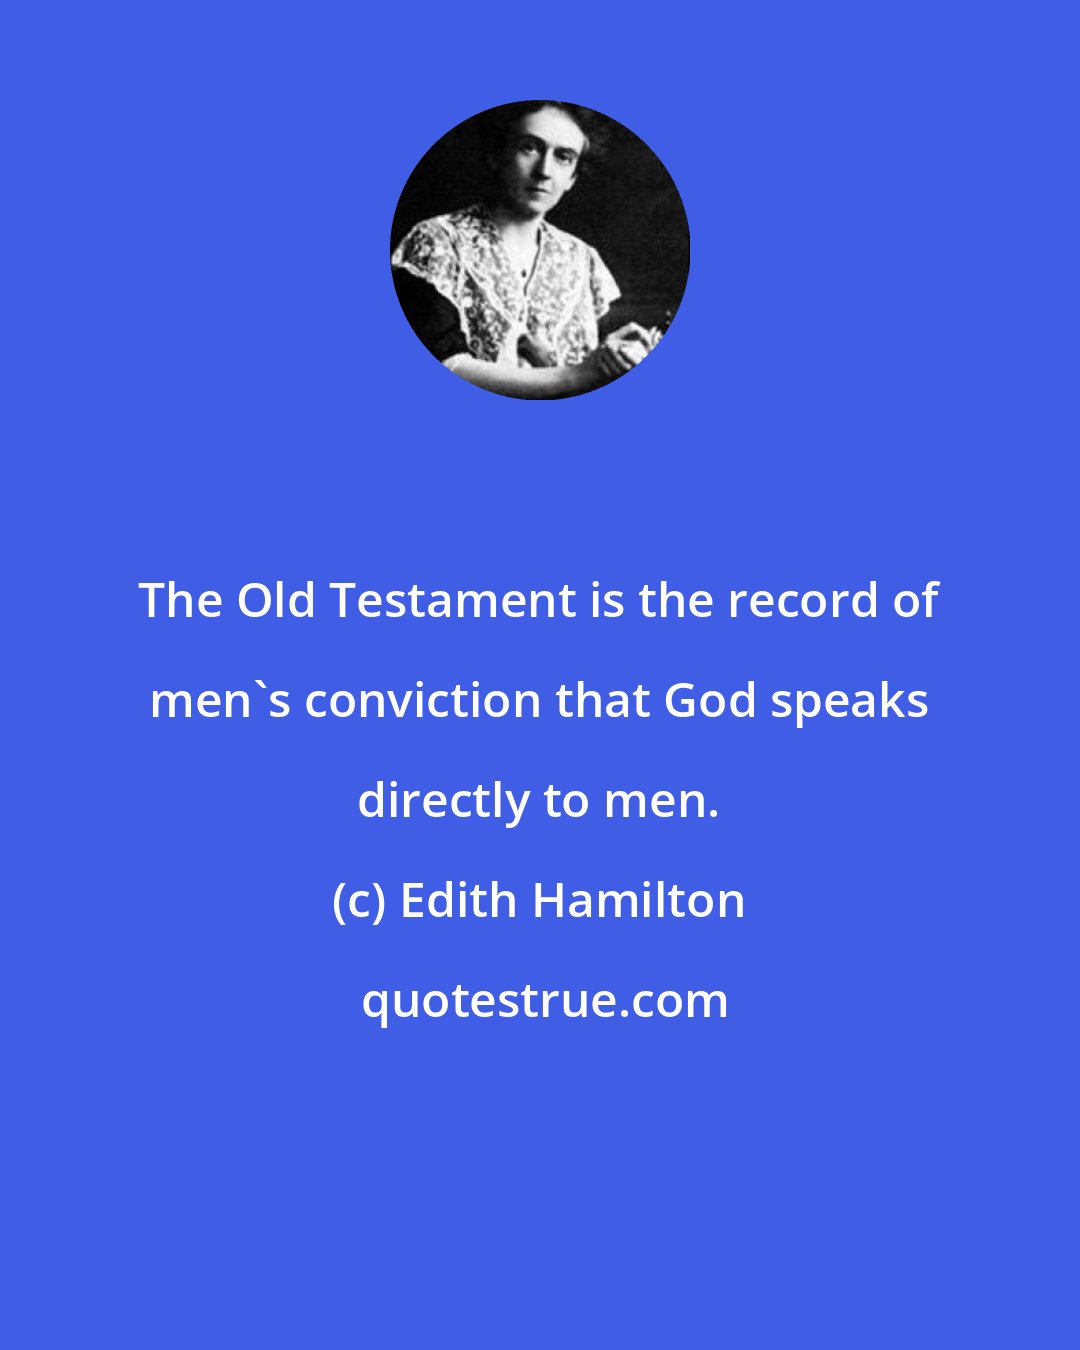 Edith Hamilton: The Old Testament is the record of men's conviction that God speaks directly to men.